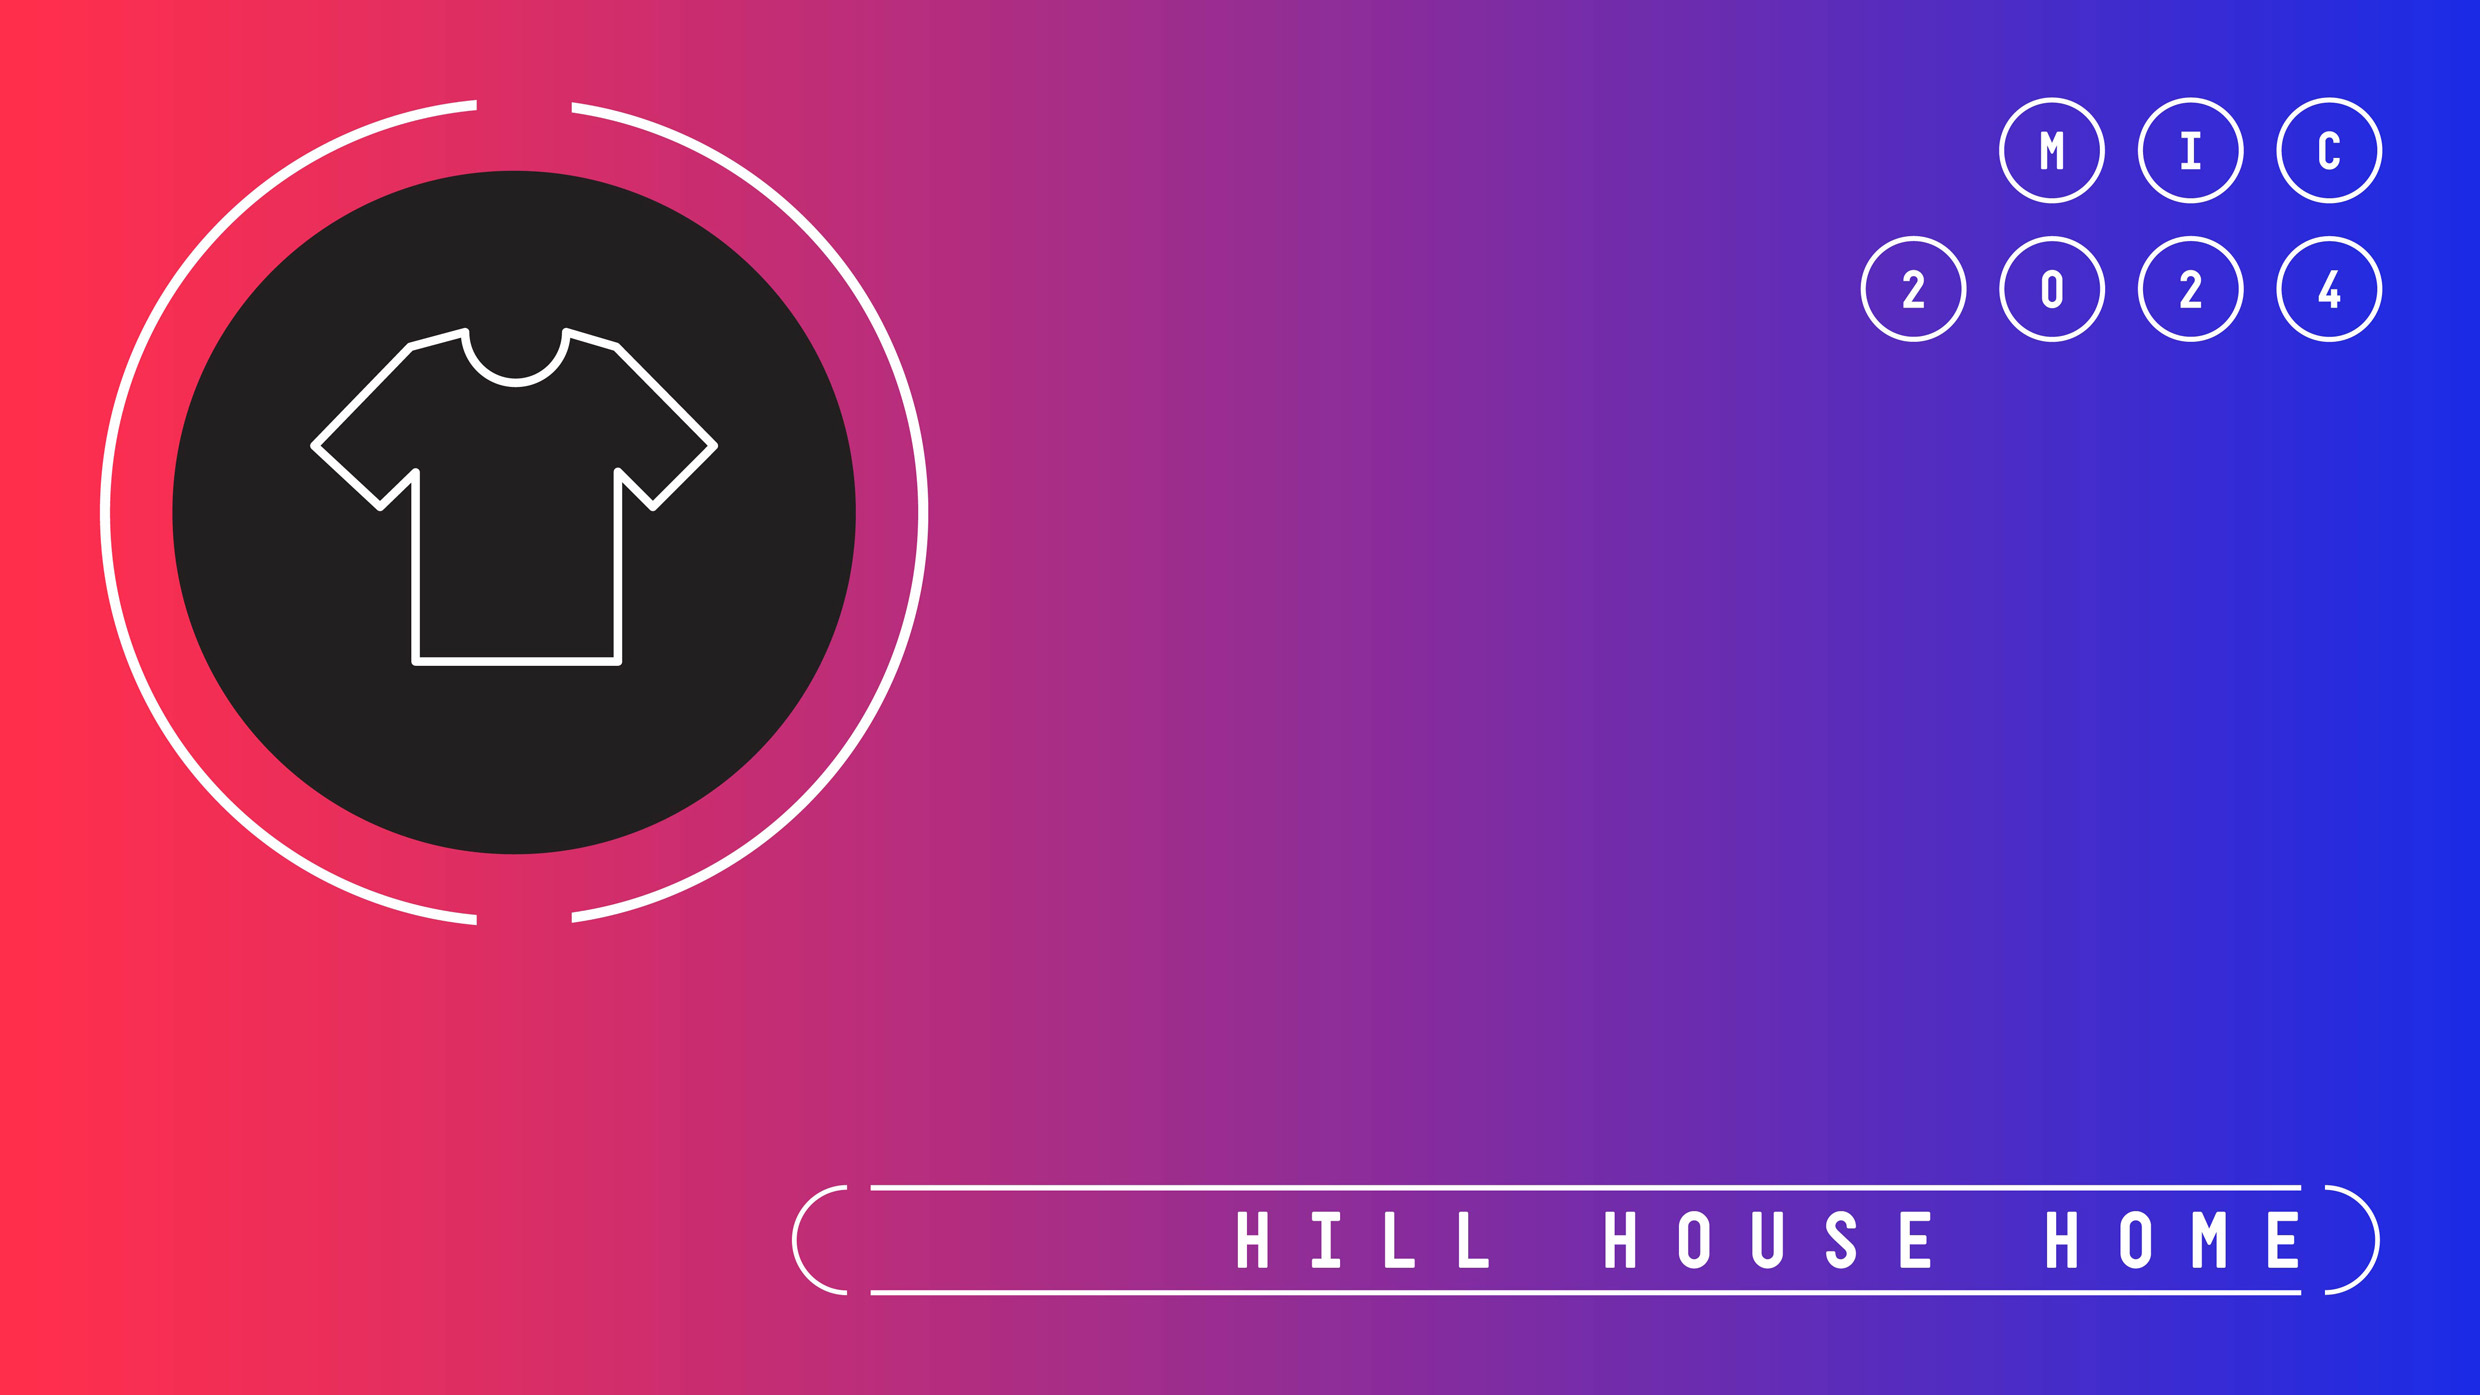 Hill House Home is one of the most innovative companies of 2024